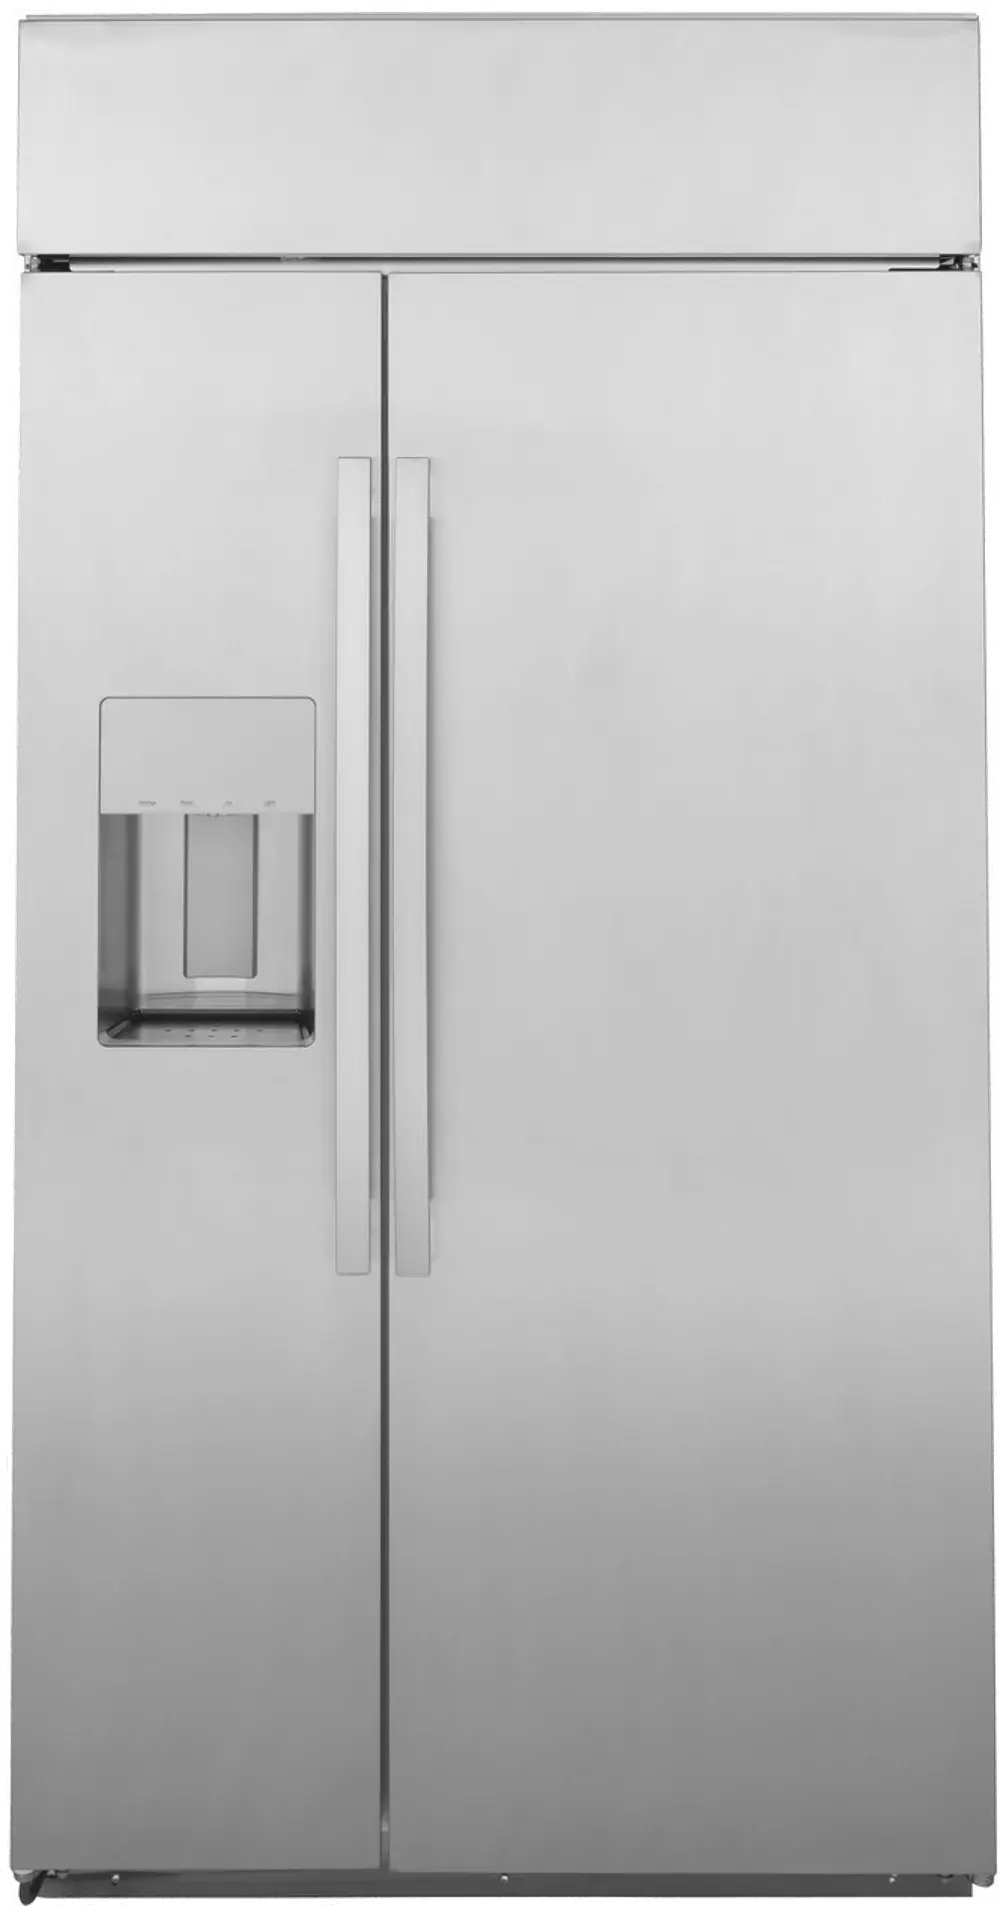 PSB48YSNSS GE Profile 28.7 cu ft Built in Side by Side Refrigerator - 48 W Stainless Steel-1